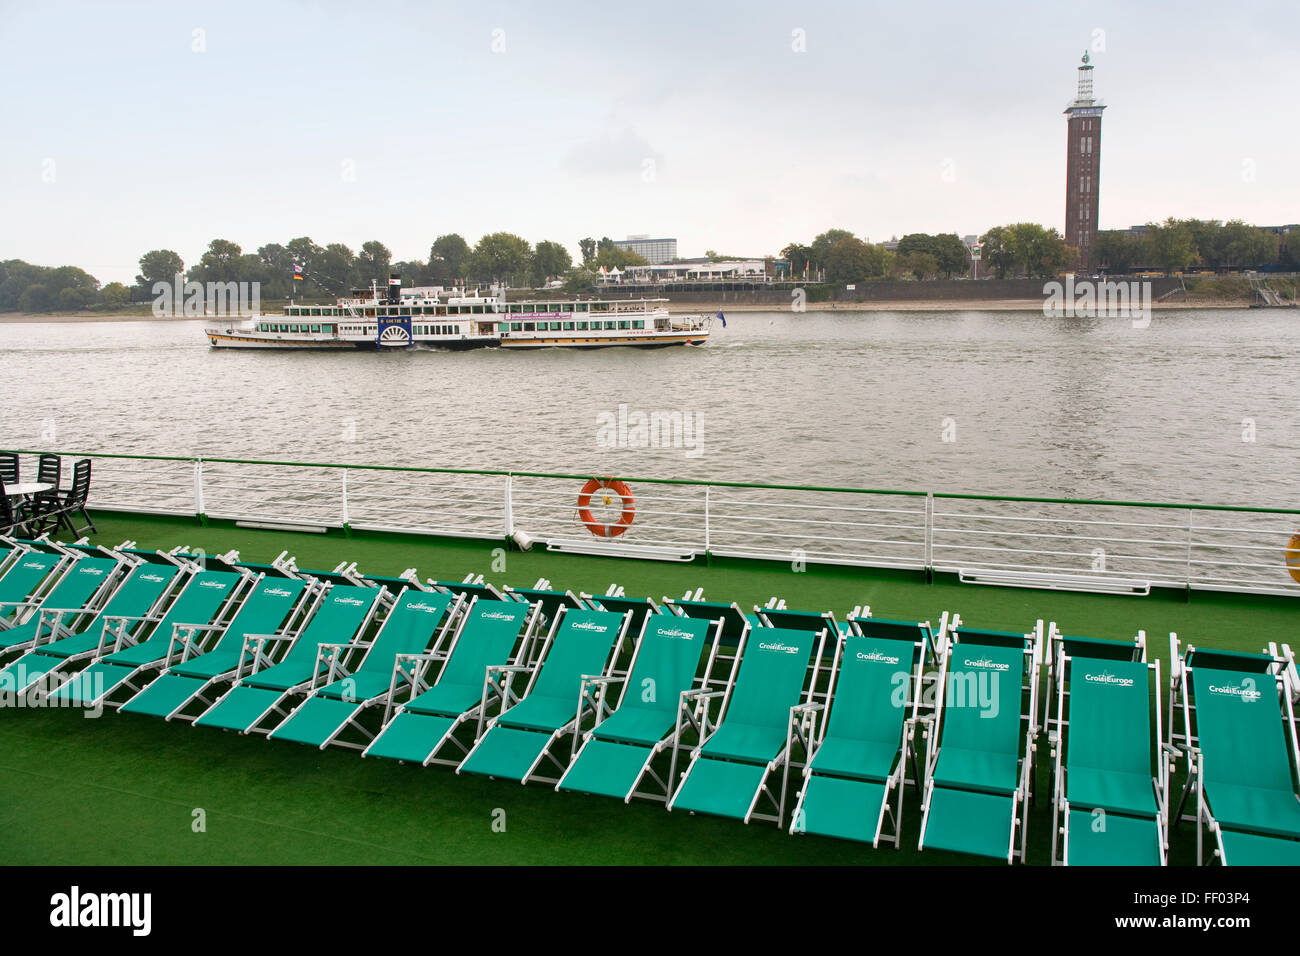 Europe, Germany, Cologne, sunloungers on the deck of a ship at the banks of the river Rhine, in thge  background the tower of th Stock Photo